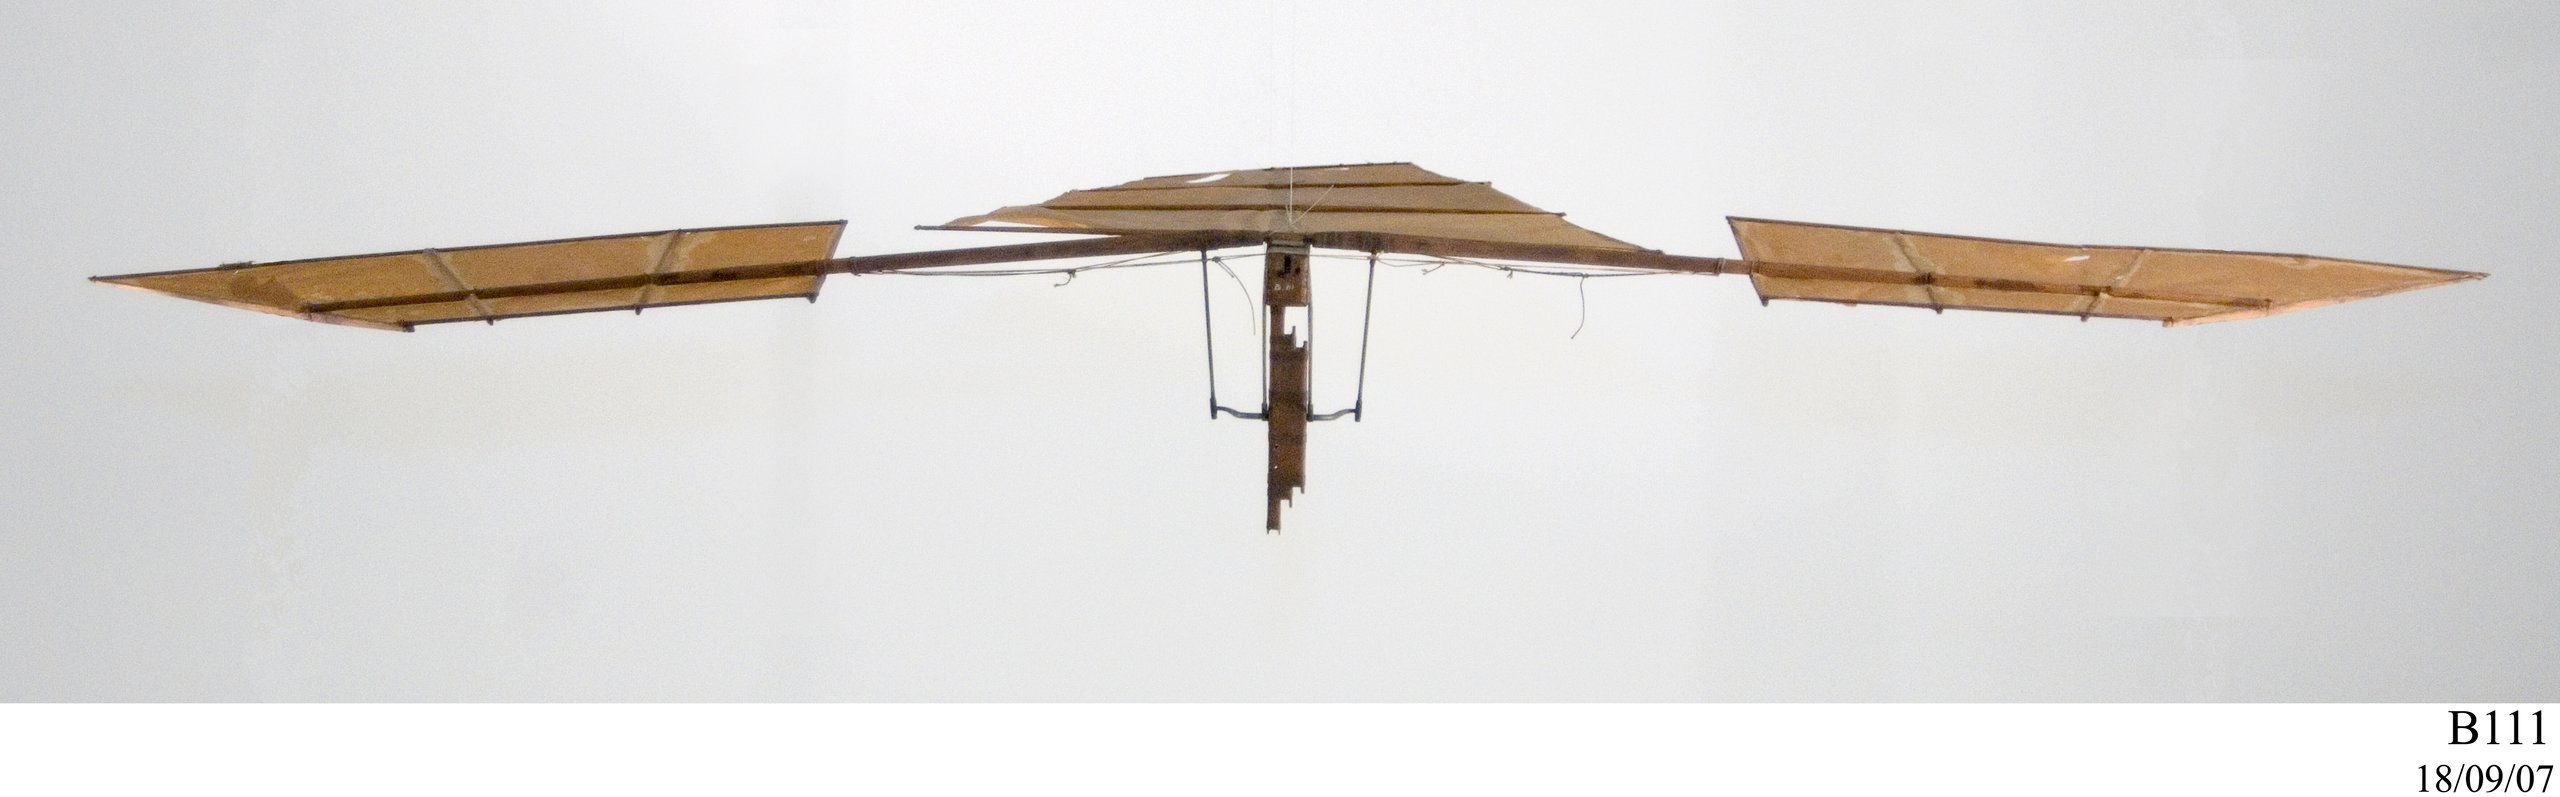 Flying machine model 'Experiment C' by Lawrence Hargrave